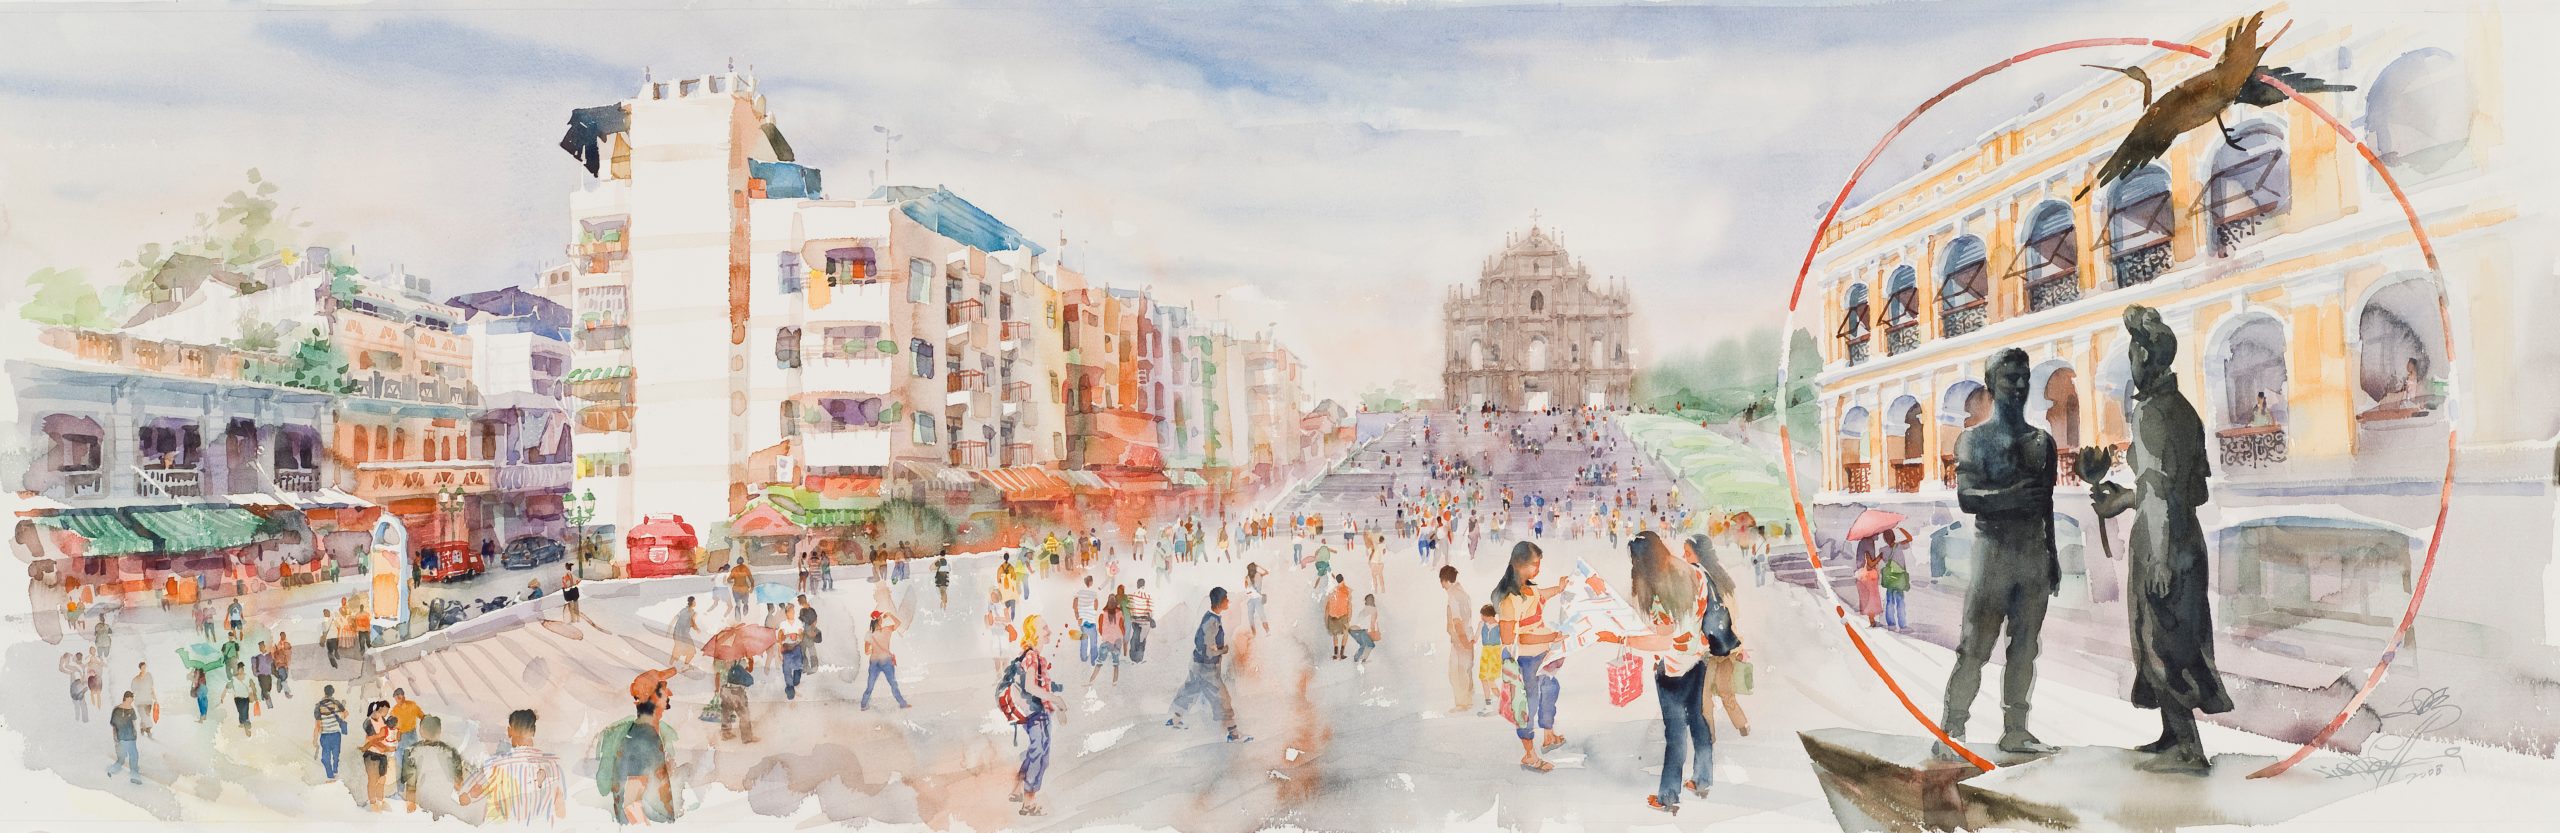 Painting of the Ruins of St. Paul’s by Lio Man Cheong, 2008